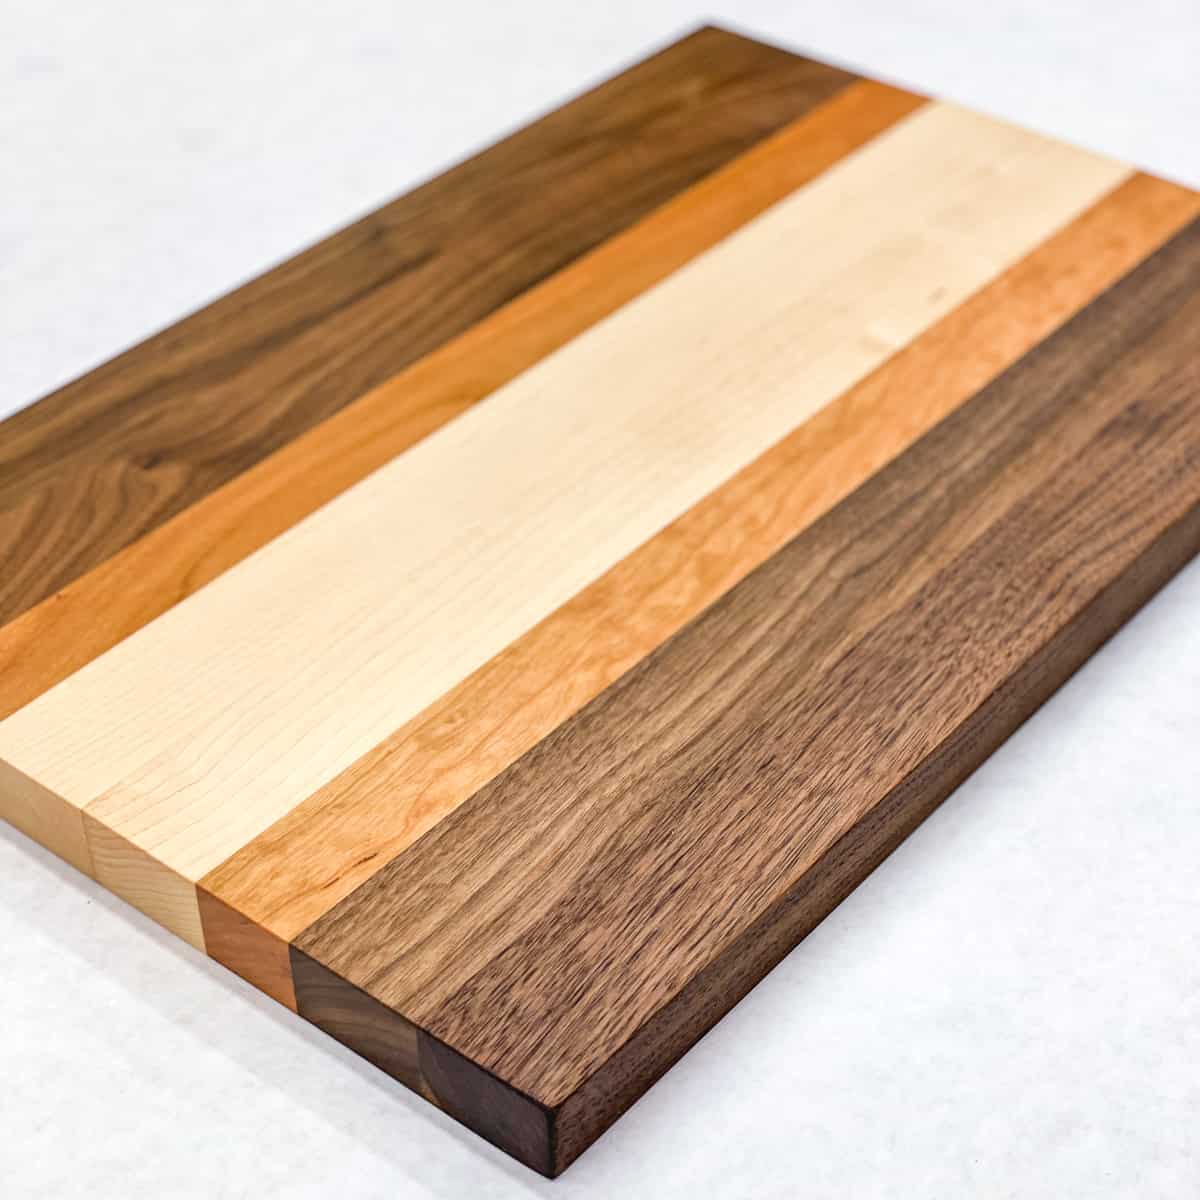 How to Make a Cutting Board Kit - The Handyman's Daughter